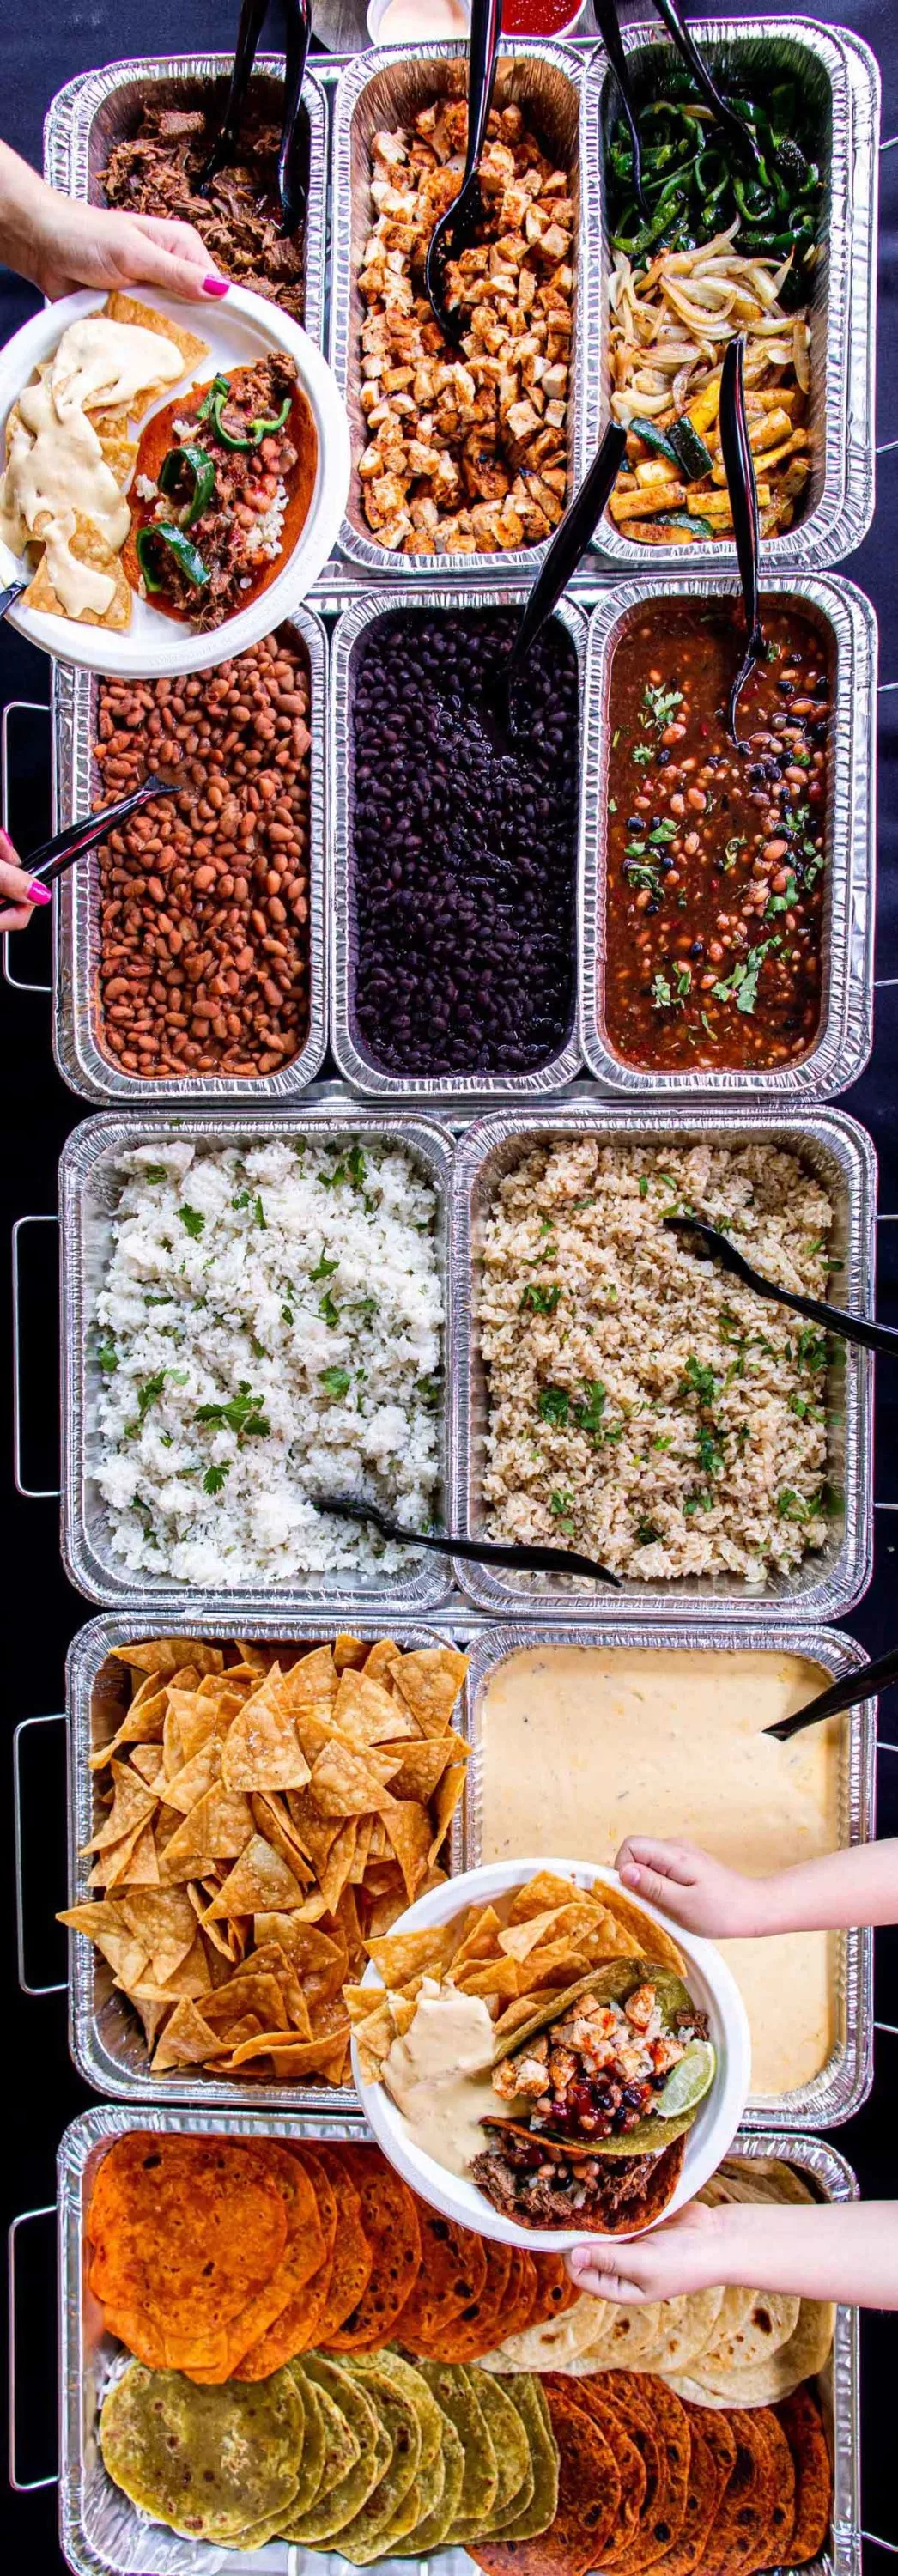 Catering trays of rice, beans, tortillas, etc.